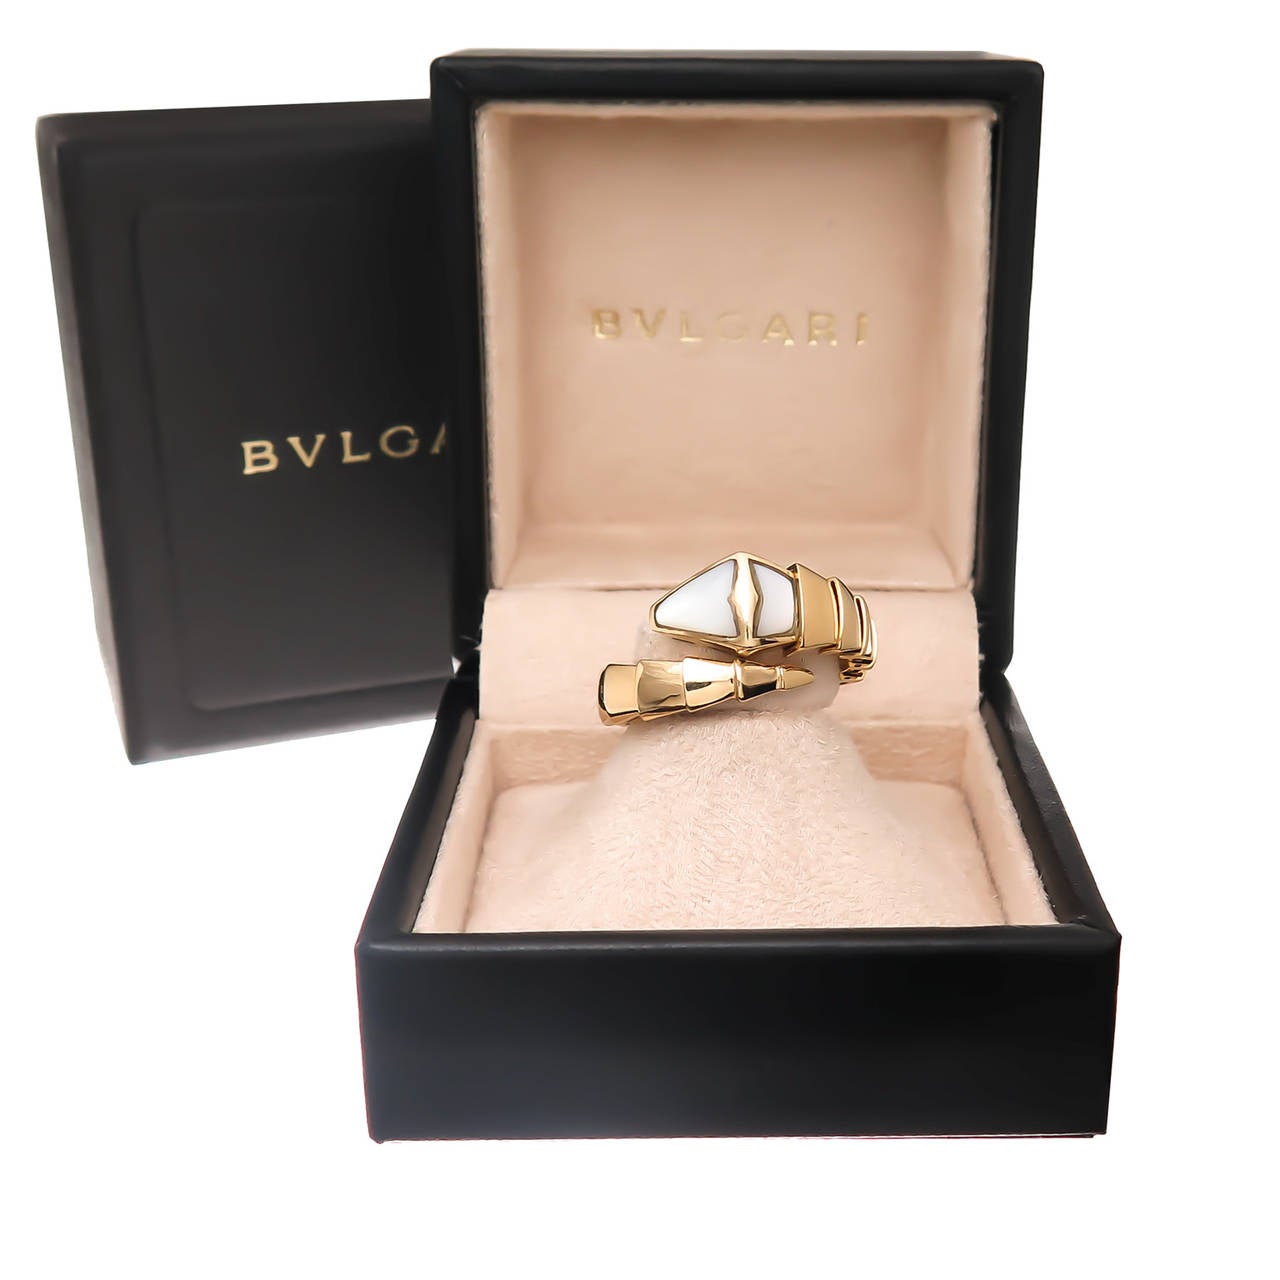 Circa 2014 Bulgari Serpenti Collection Ring, 18K yellow Gold and Mother of Pearl, signed and numbered. This ring is flexible and on the small size is a size 6 1/2 and will easily go up to a size 8. Comes in the original Bulgari Presentation box.